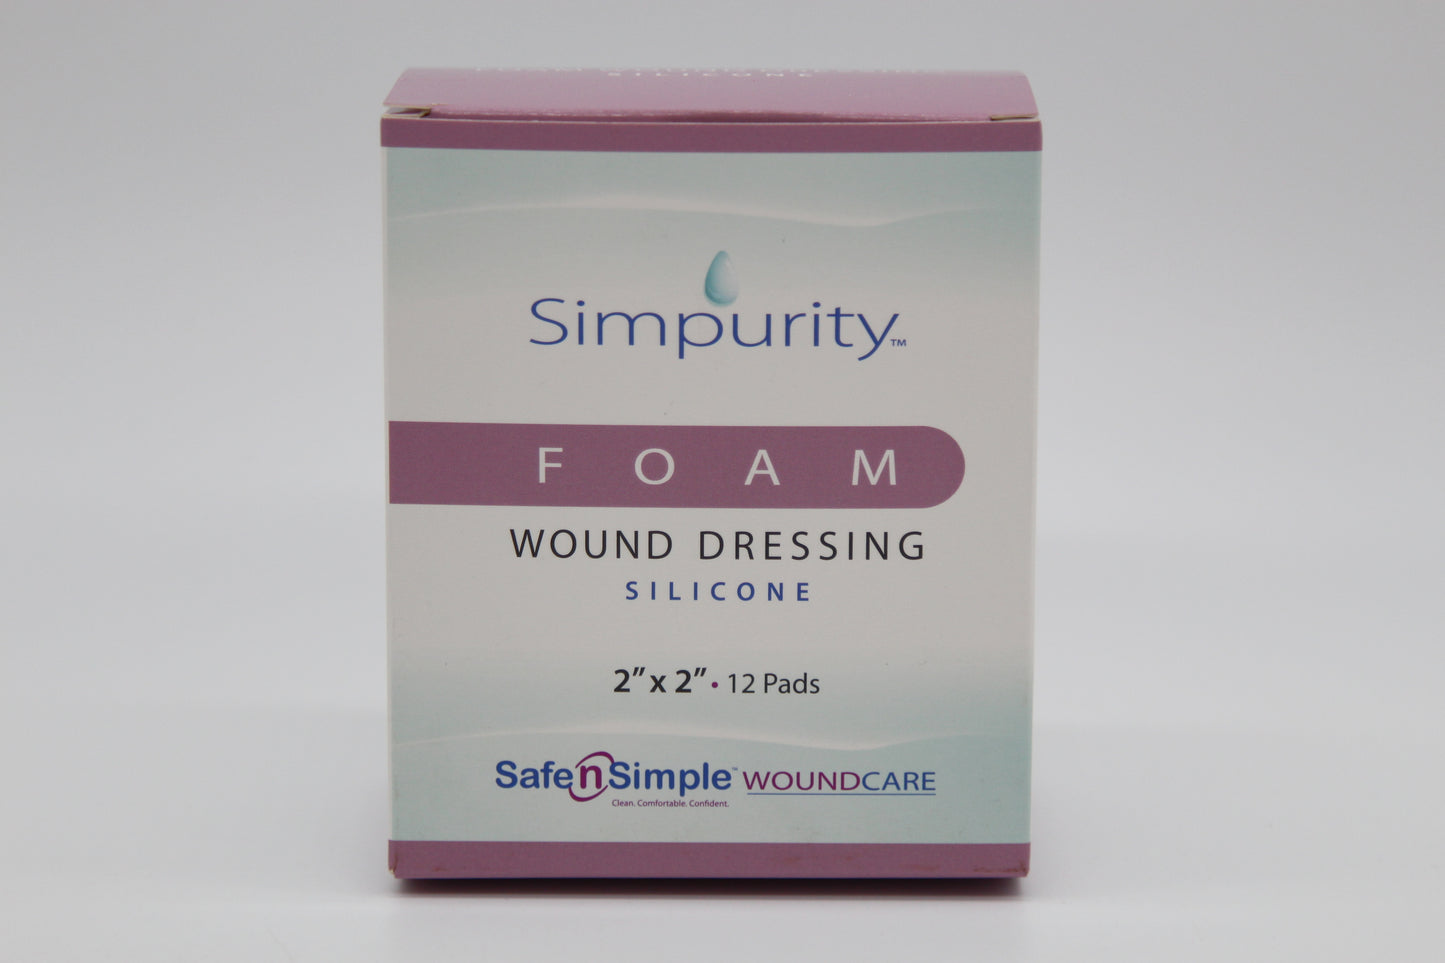 Silicone Pads | Medical products | New medical products | Wound care dressing